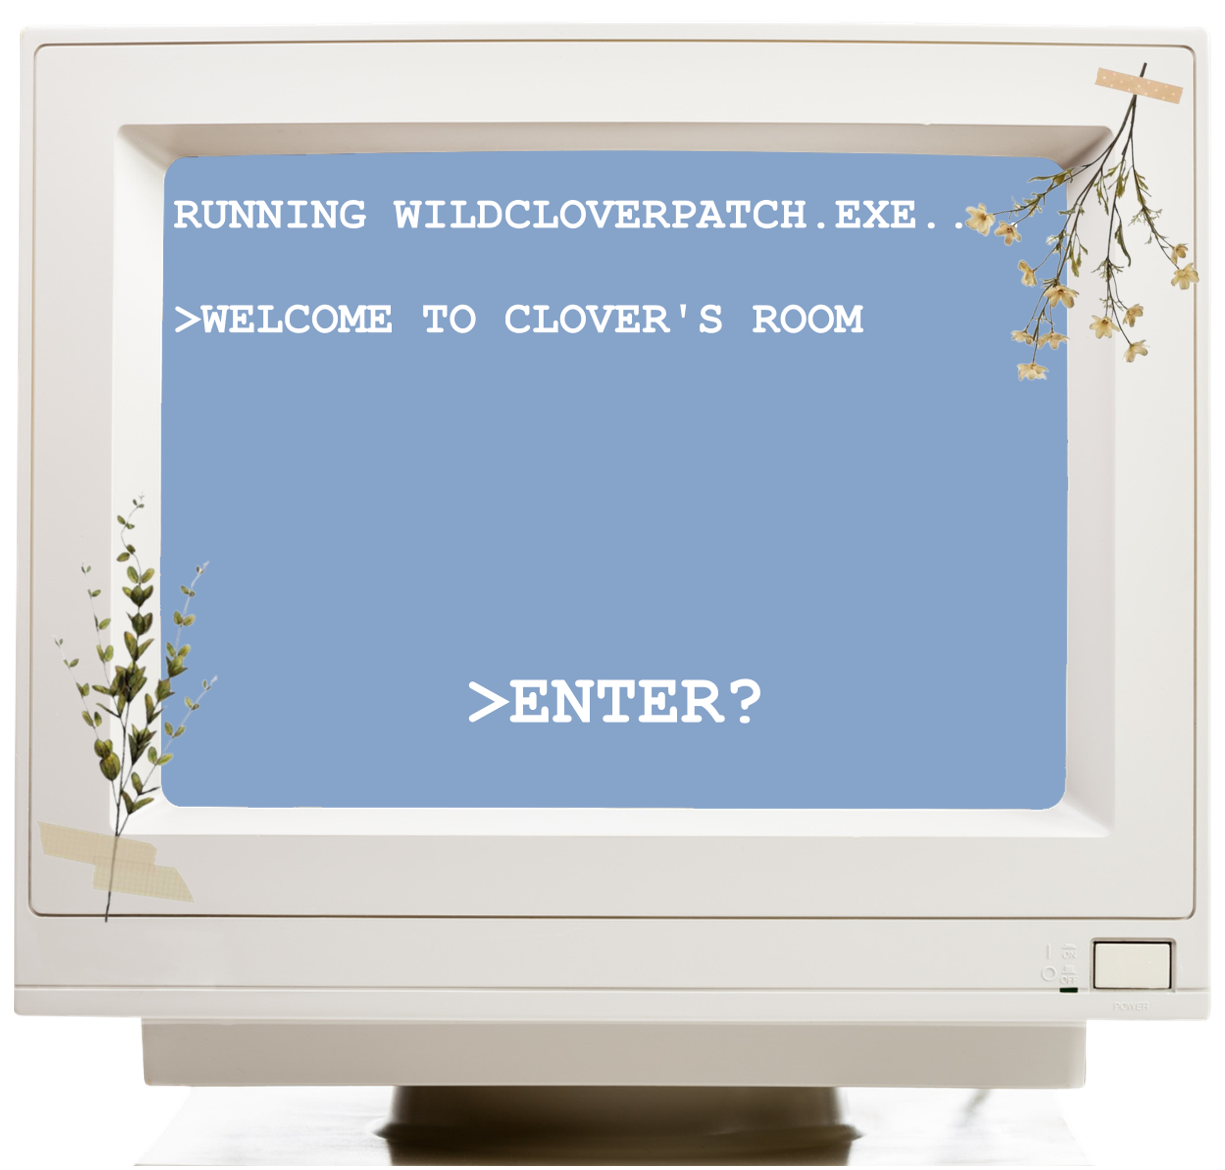 Computer displaying text that says running wildcloverpatch.exe, welcome to clover's room, enter?